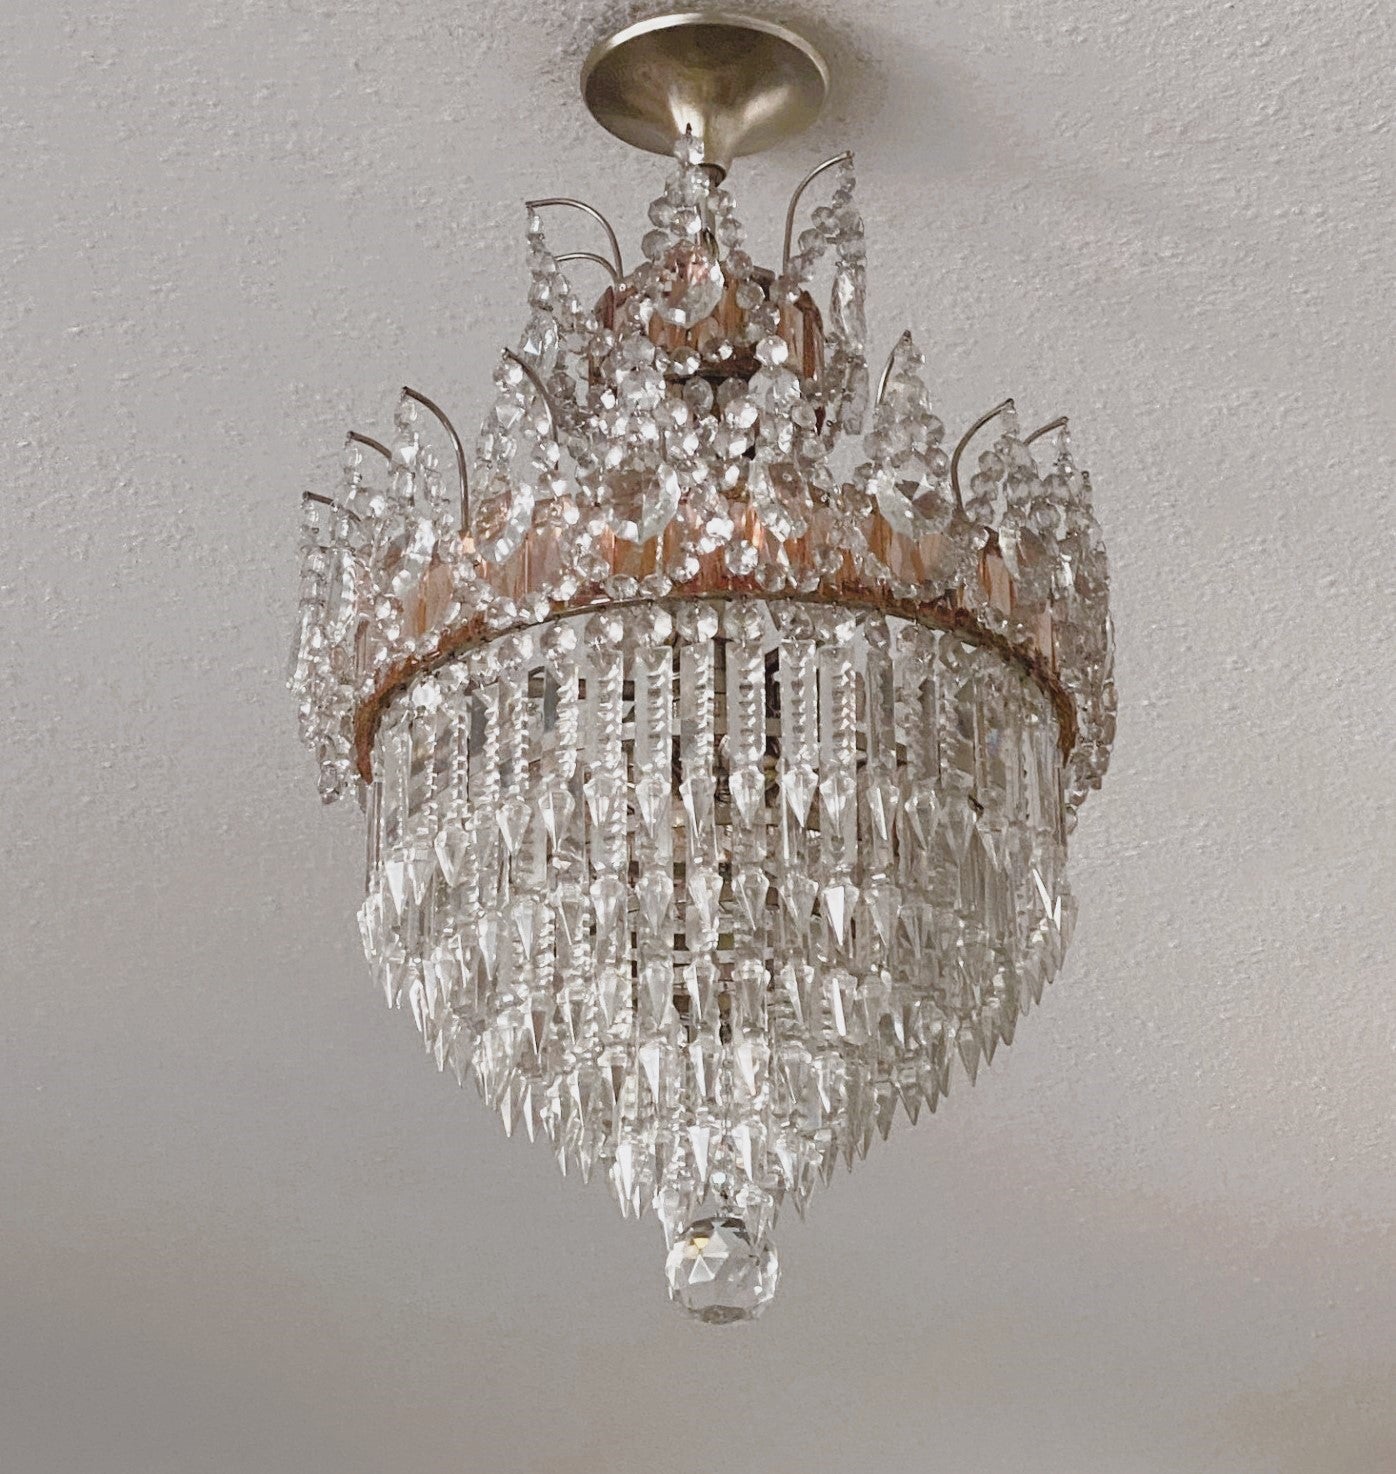 A wonderful and rare pure crystal six-tier waterfall flush mount or chandelier, France circa 19130-1939. Chrome mounted, frames covered with large pink faceted crystals surrounded by clear crystals garlands - impressive lighting effect!
This flush